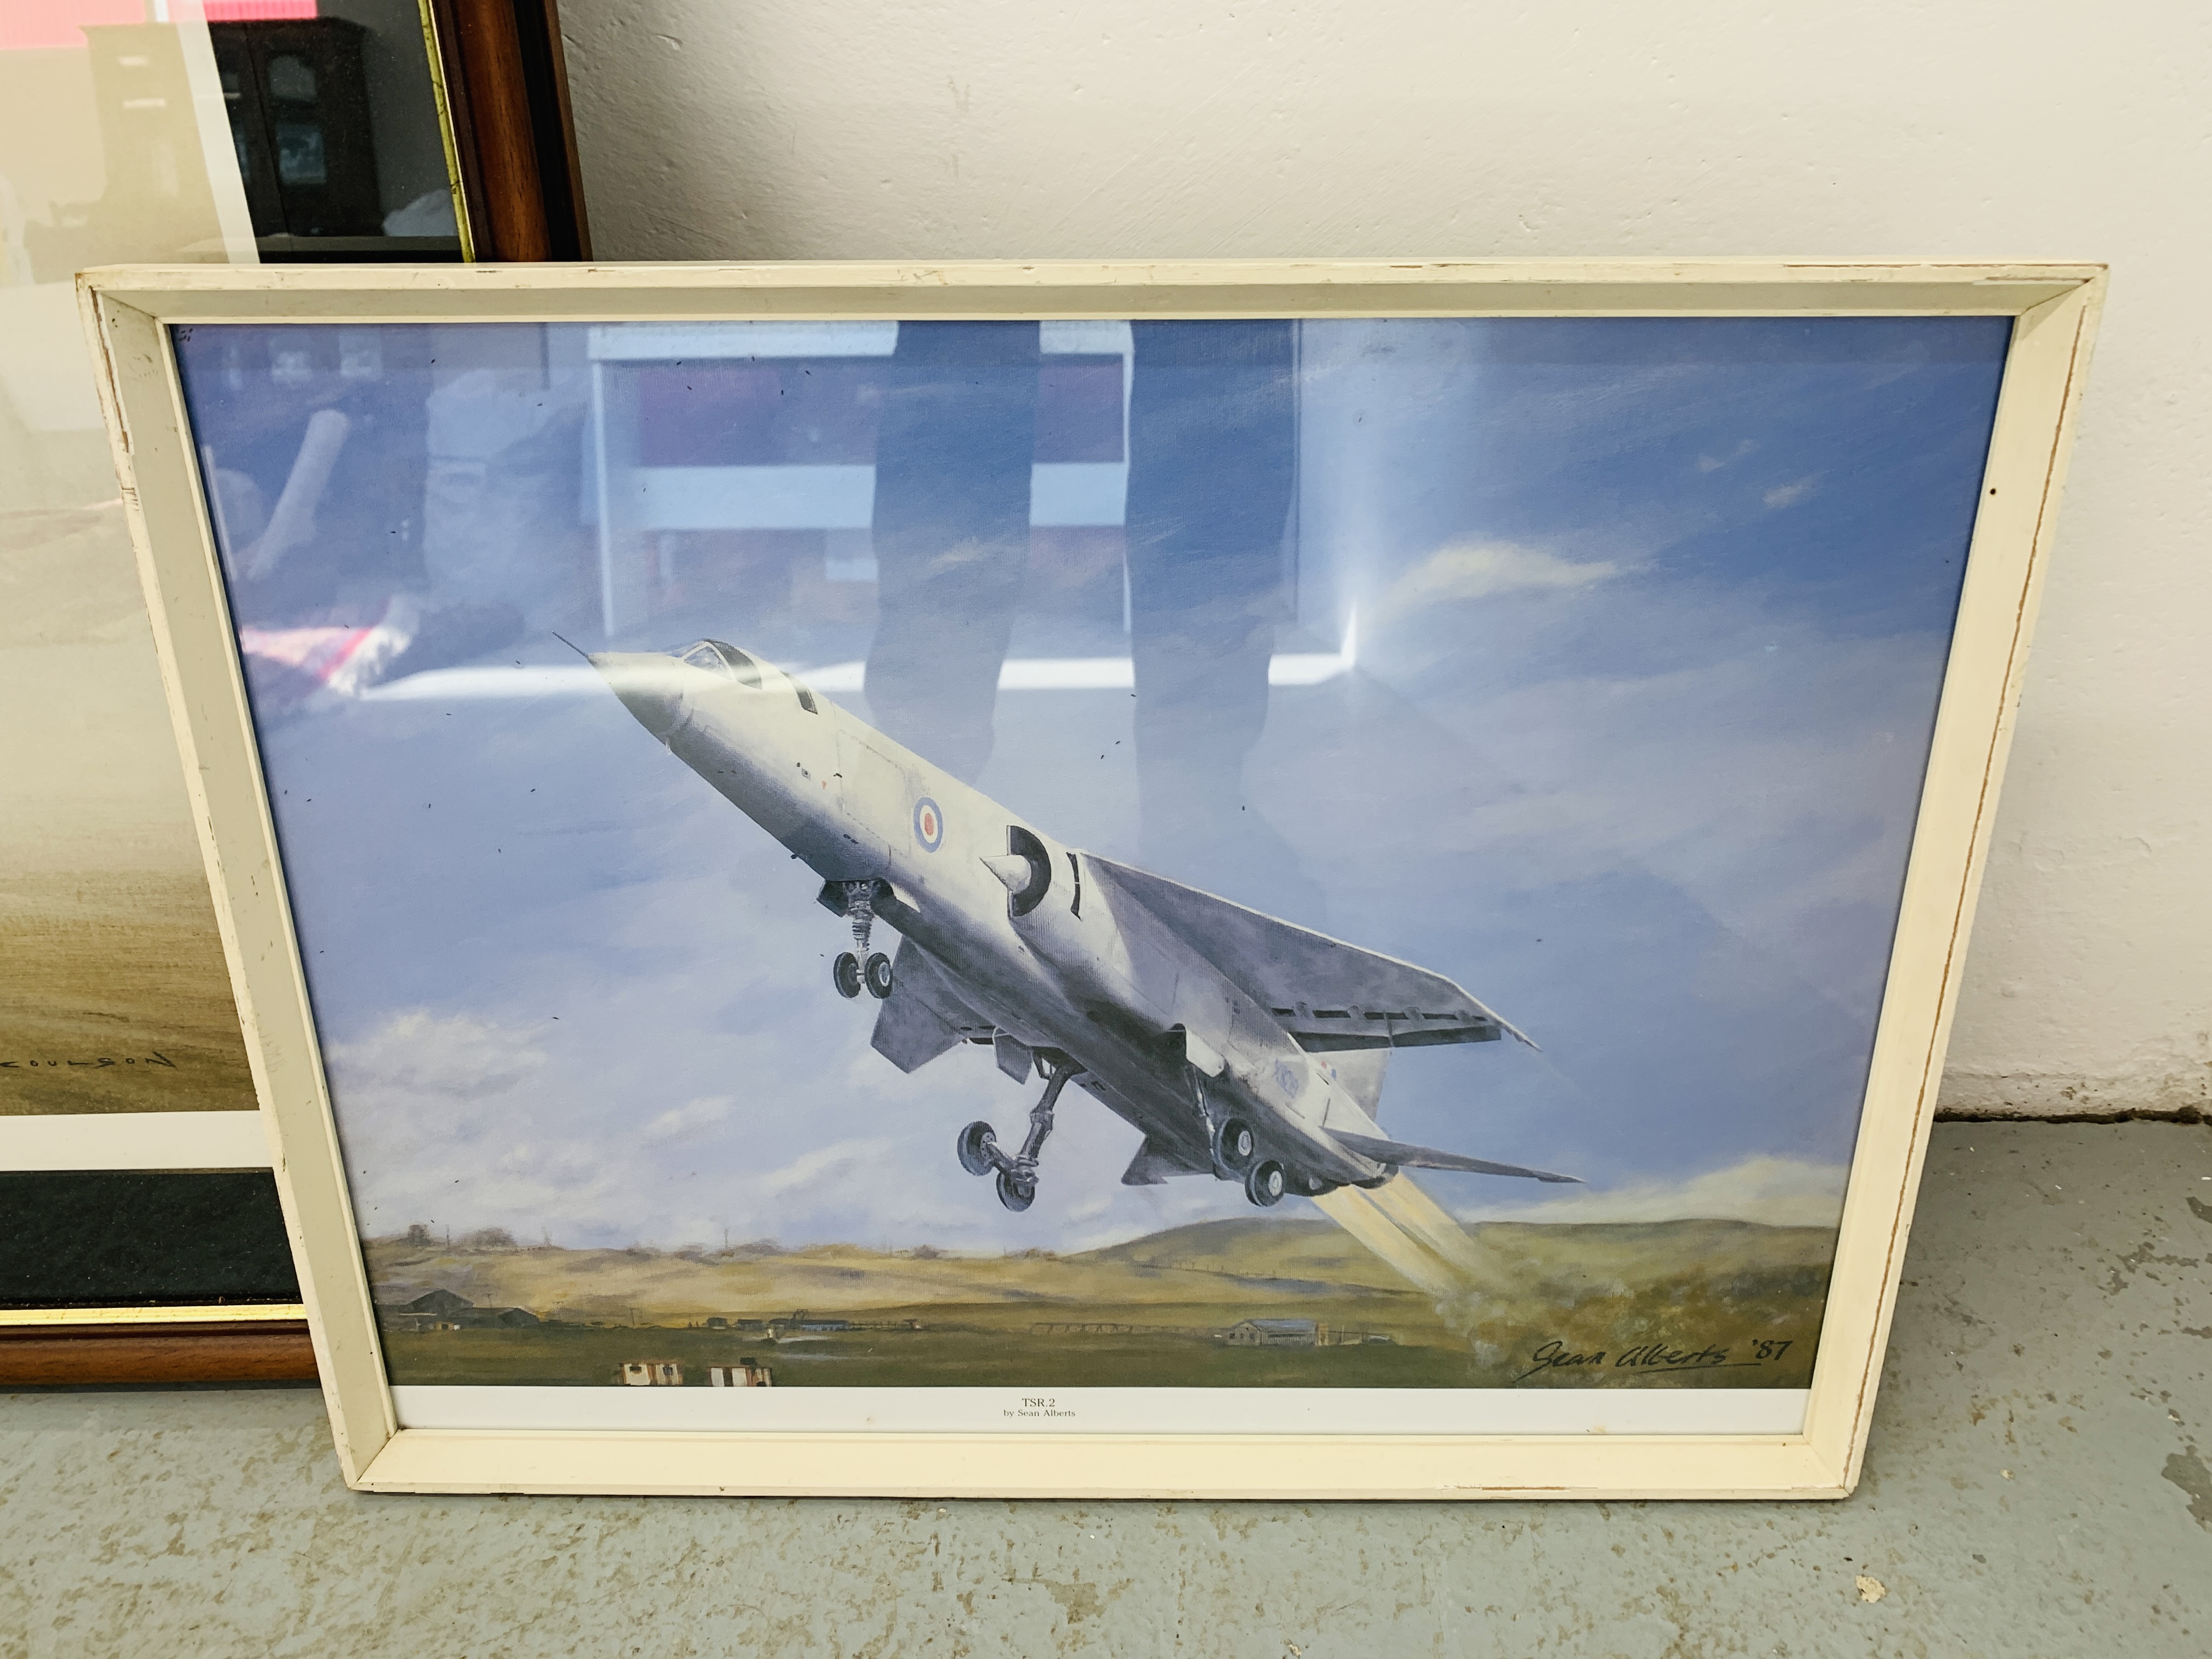 FRAMED "OFF DUTY LANCASTER AT REST" PRINT ALONG WITH A FRAMED "TSR2" PRINT BY SEAN ALBERTS. - Image 5 of 5